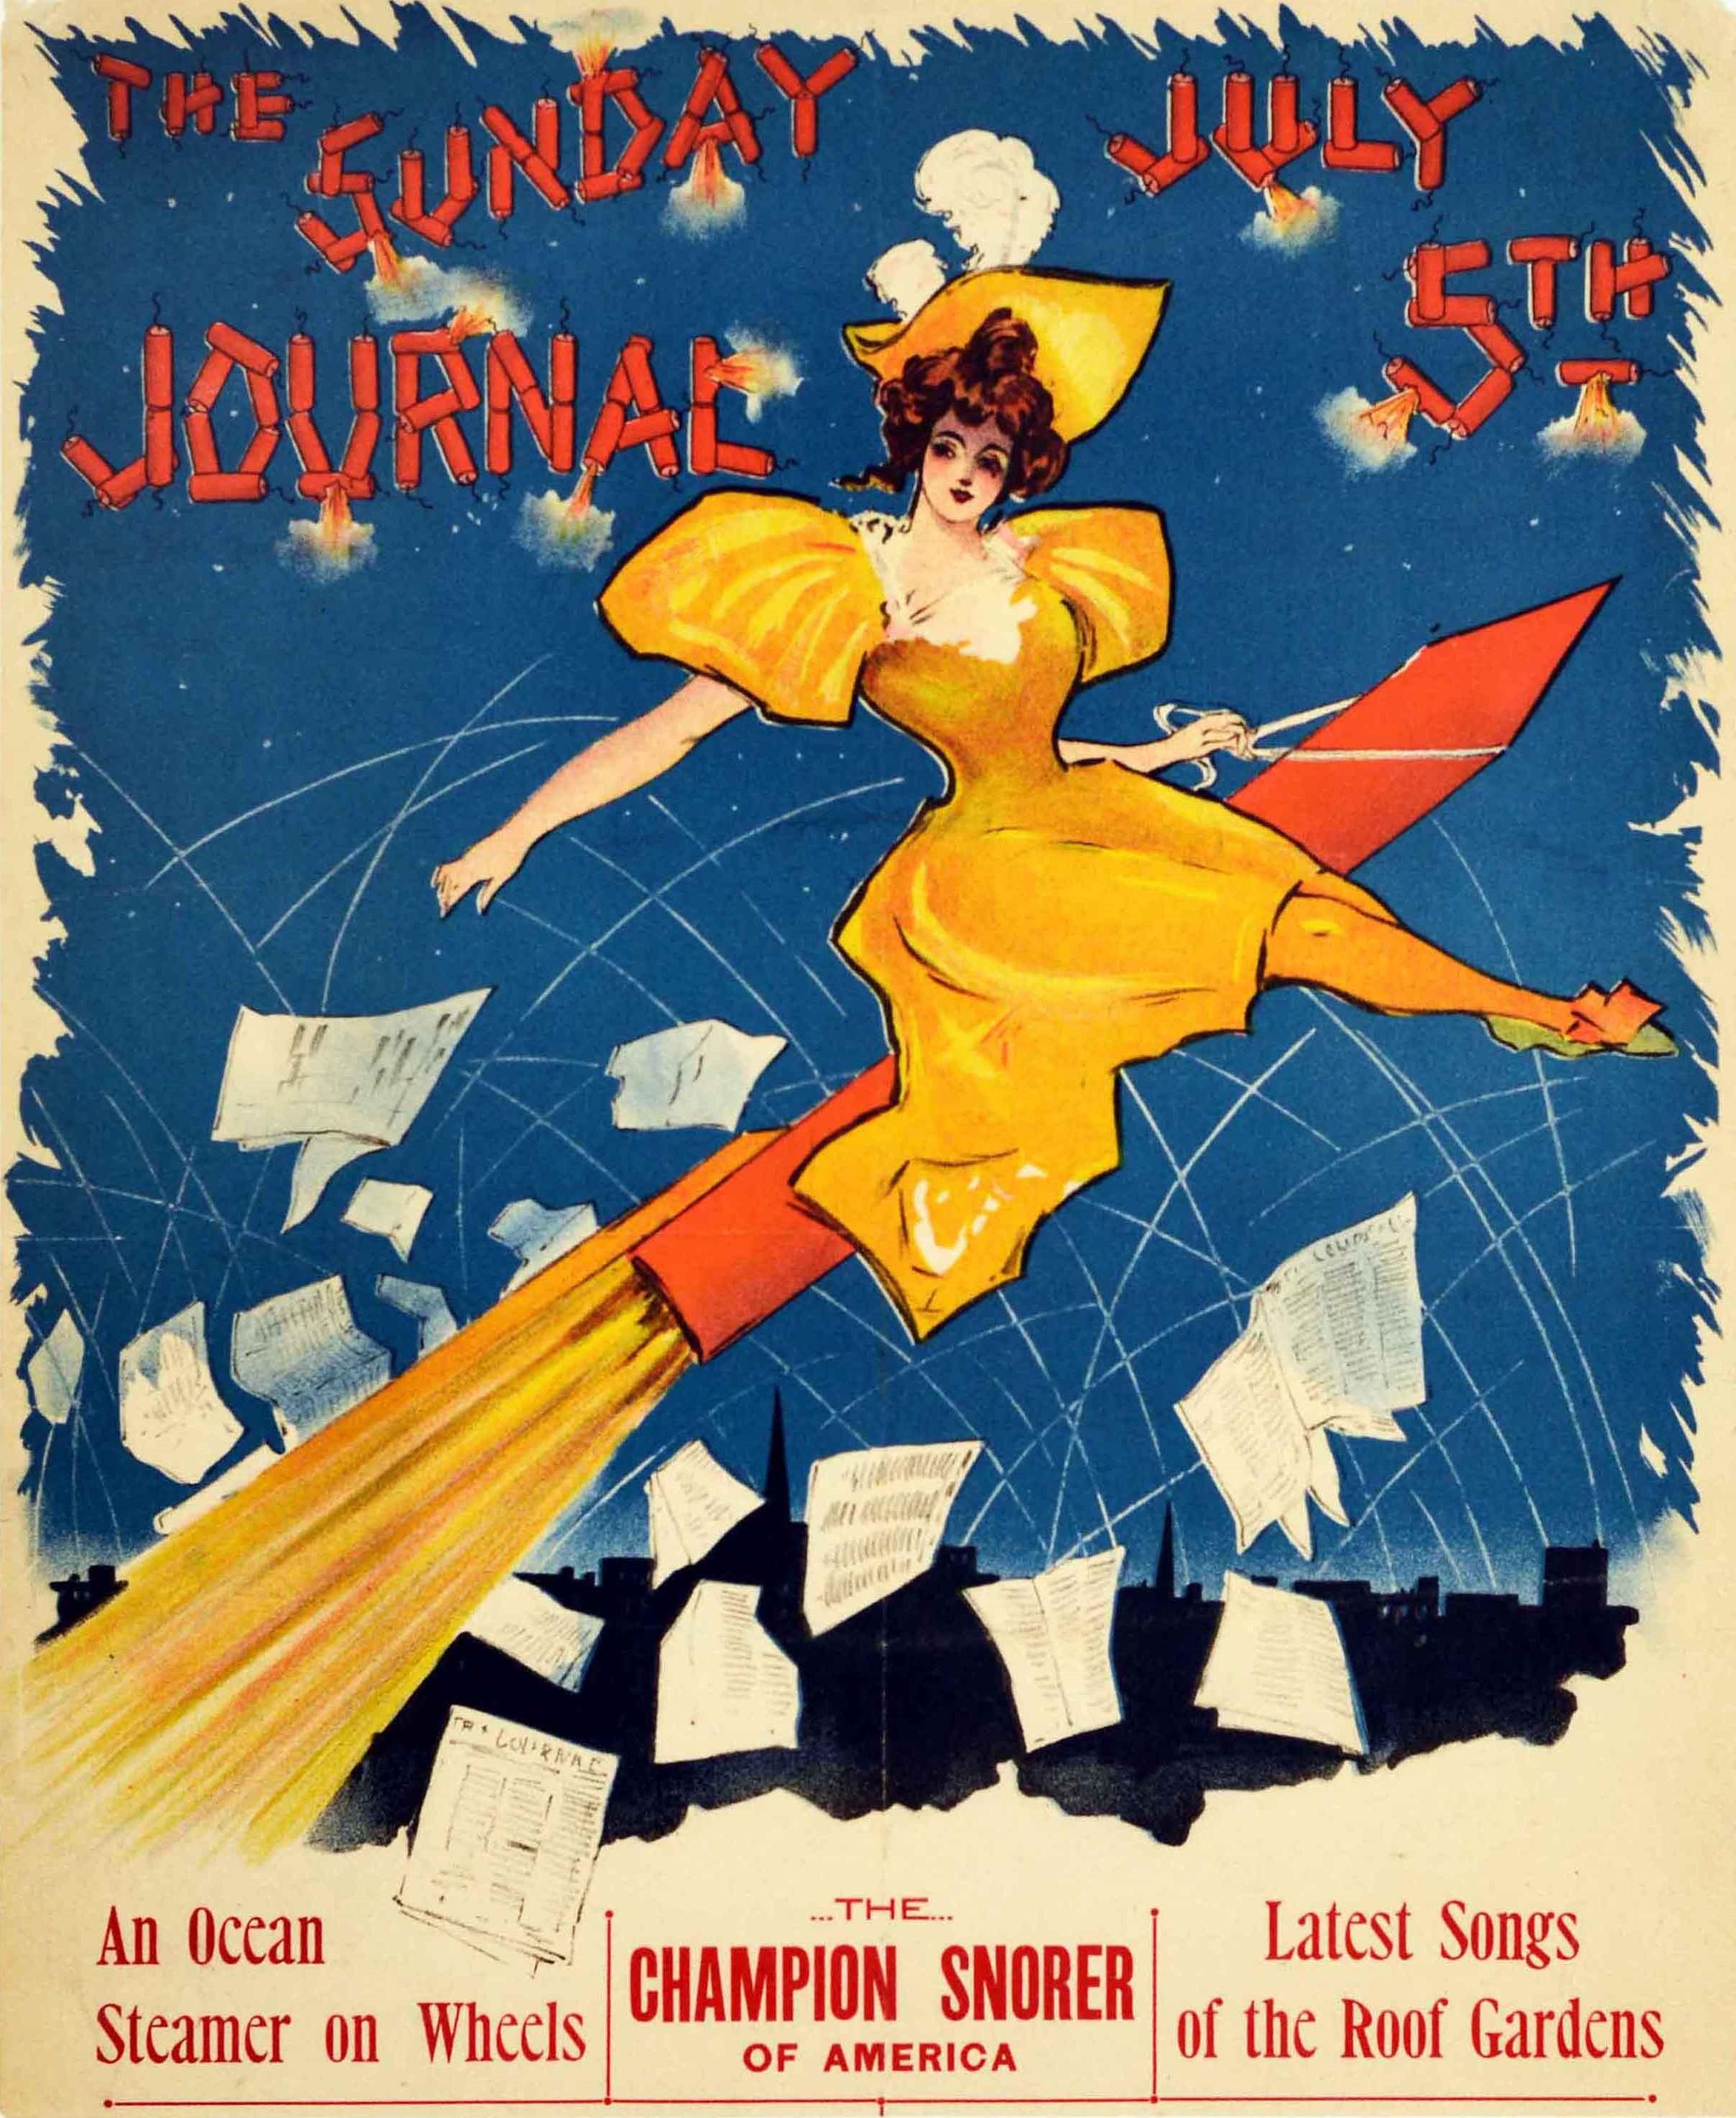 Original antique advertising poster for The Sunday Journal 5 July 1896 featuring a colourful Belle Epoque design by Ernest Haskell (1876-1925) for the Independence Day celebrations showing a lady in a yellow dress flying over a city skyline on a red